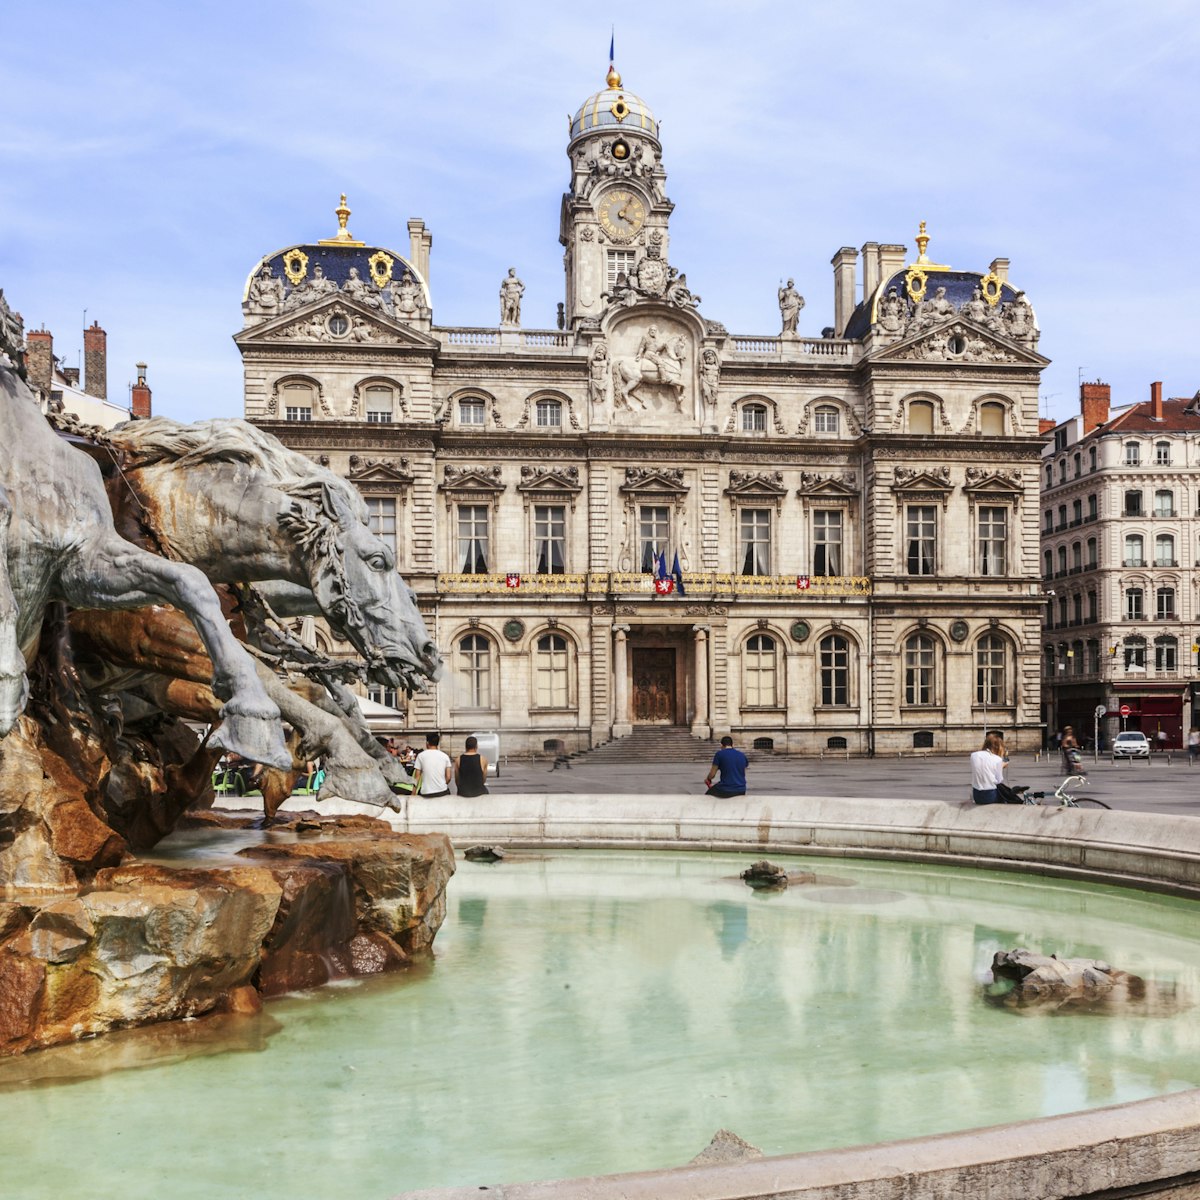 The Terreaux square with fountain in Lyon city, France; Shutterstock ID 281818262; Your name (First / Last): Daniel Fahey; GL account no.: 65050; Netsuite department name: Online Editorial; Full Product or Project name including edition: Lyon BiT